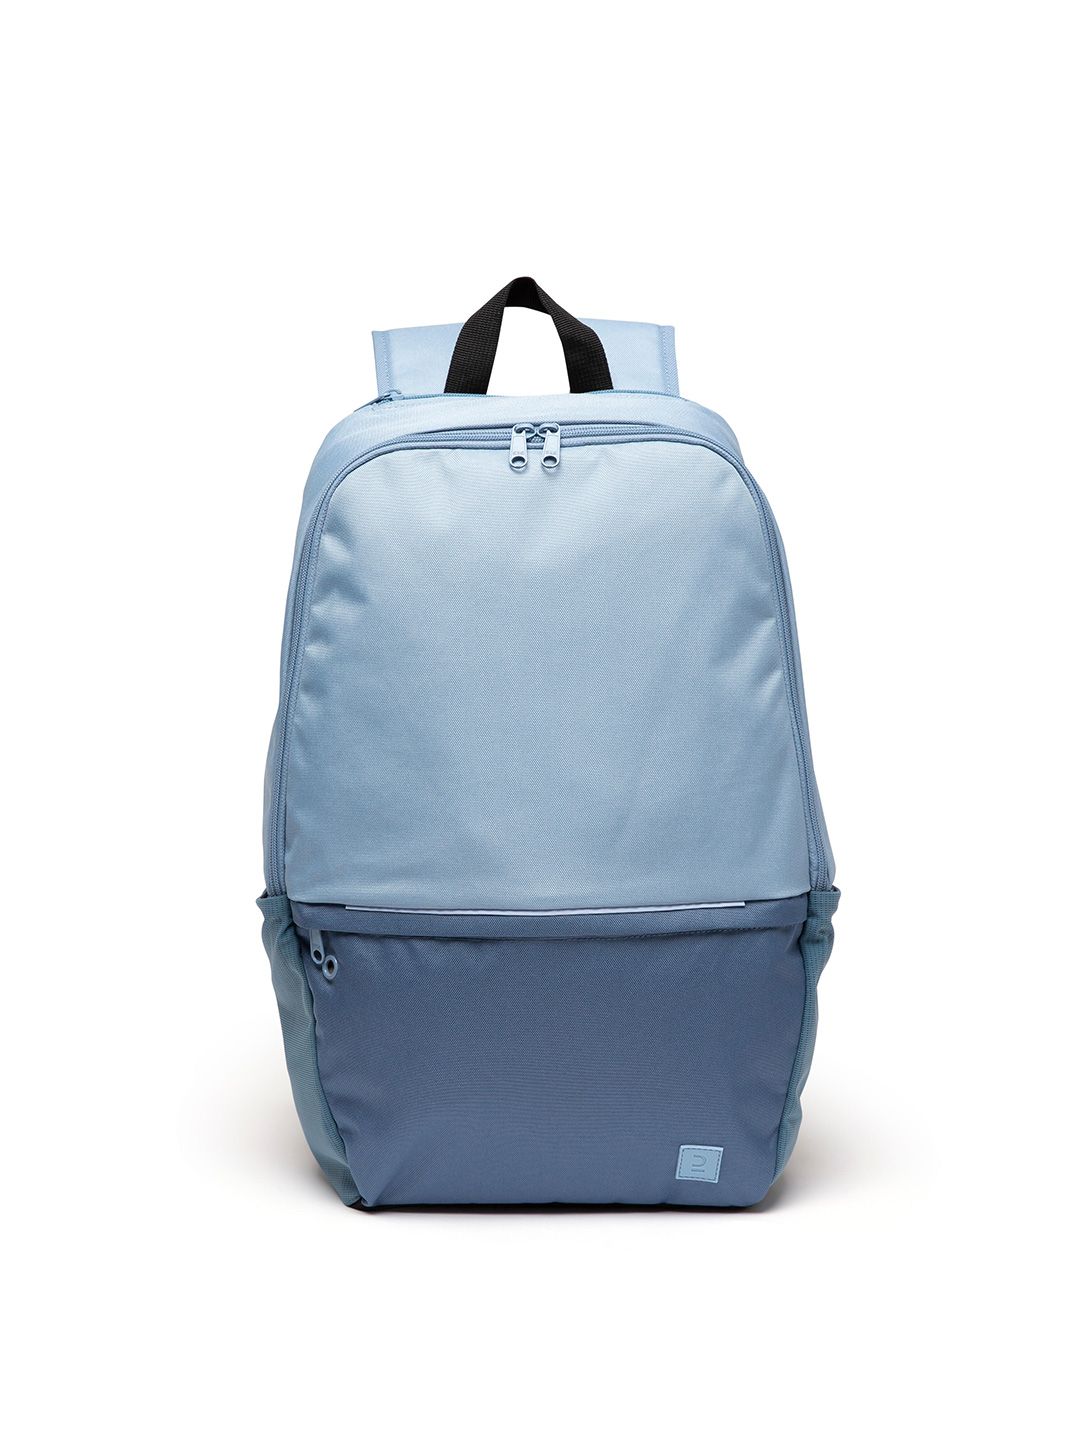 Kipsta By Decathlon Unisex Blue Colourblocked Backpack Price in India